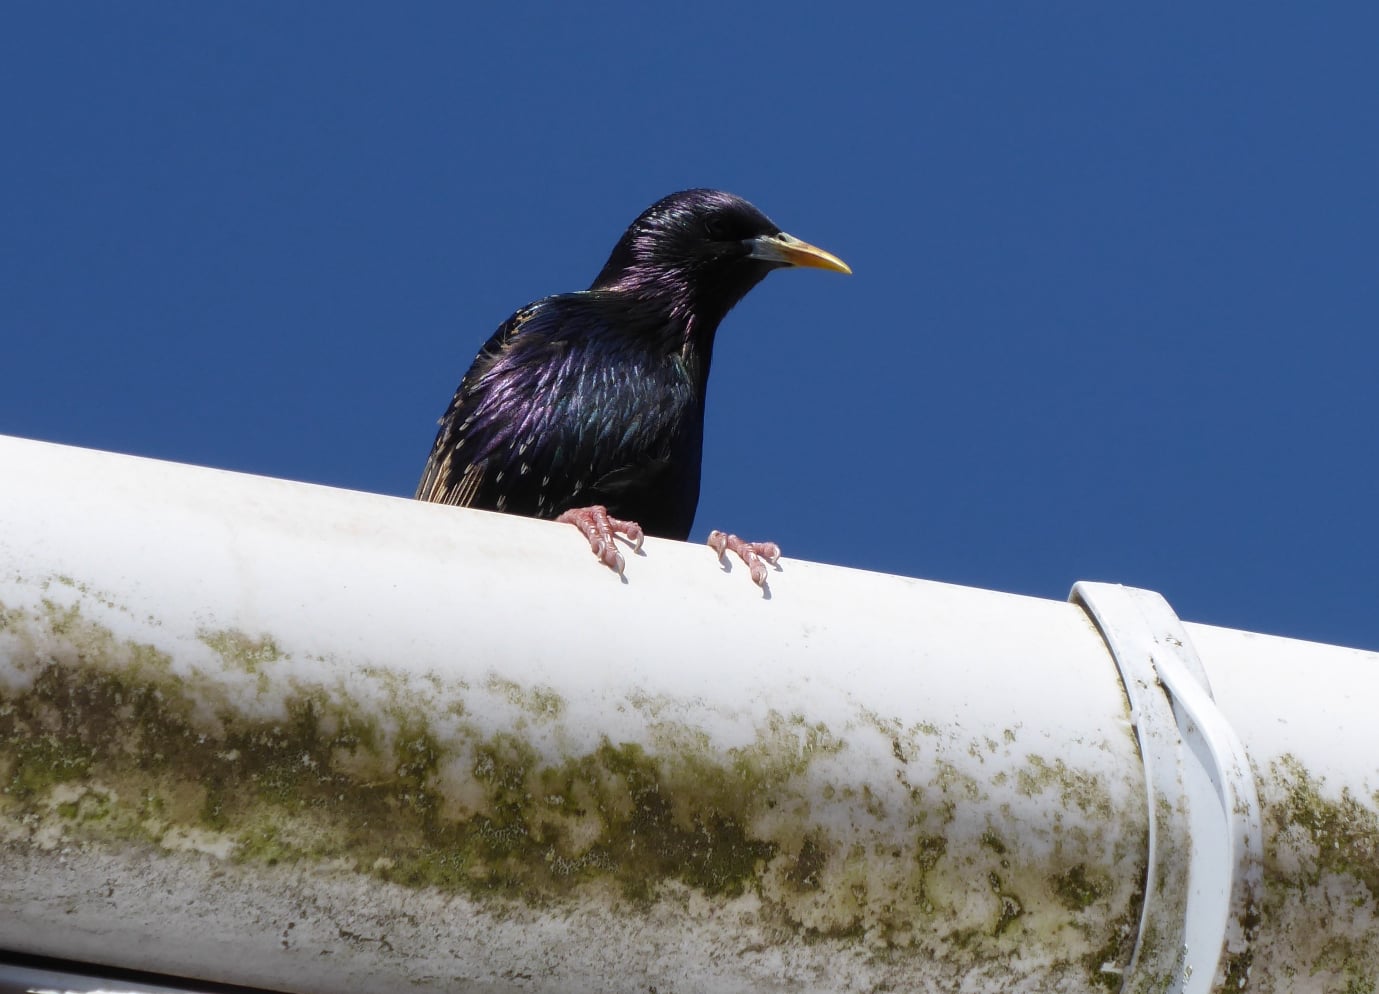 Bird. A starling sitting on a roof gutter against a clear blue sky.